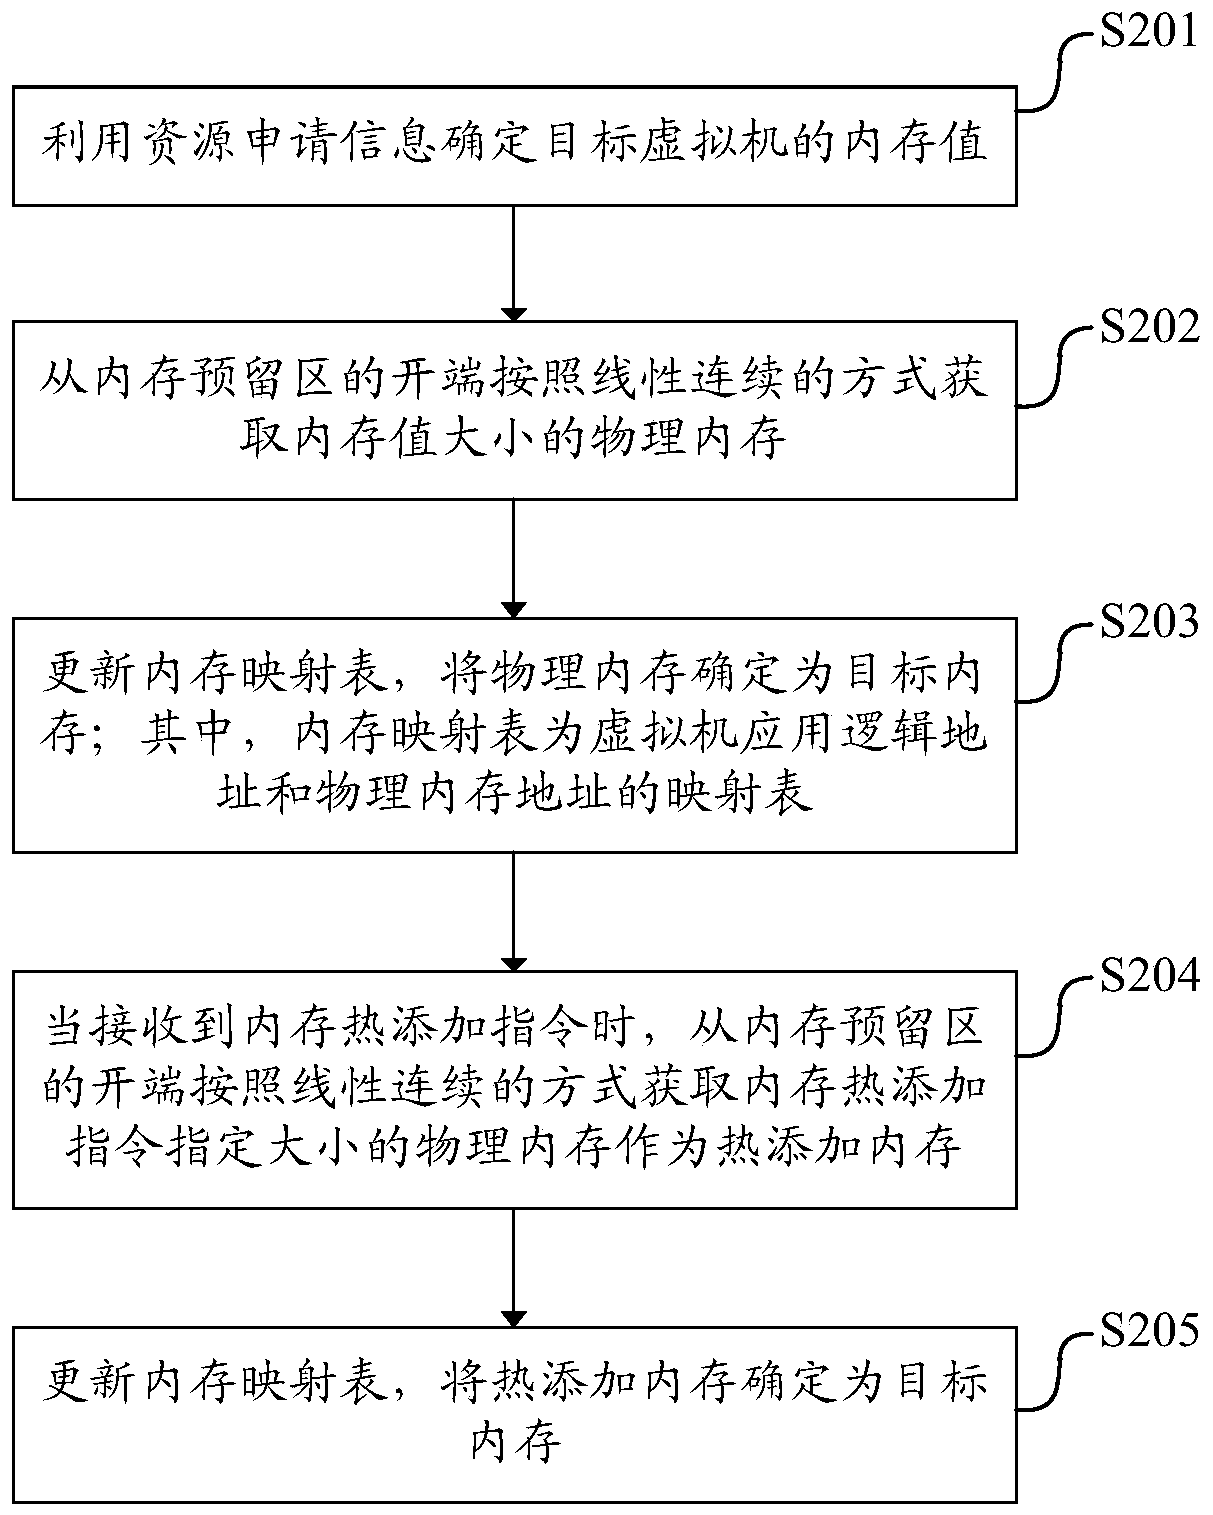 Virtual machine resource allocation method, device and device, and readable storage medium